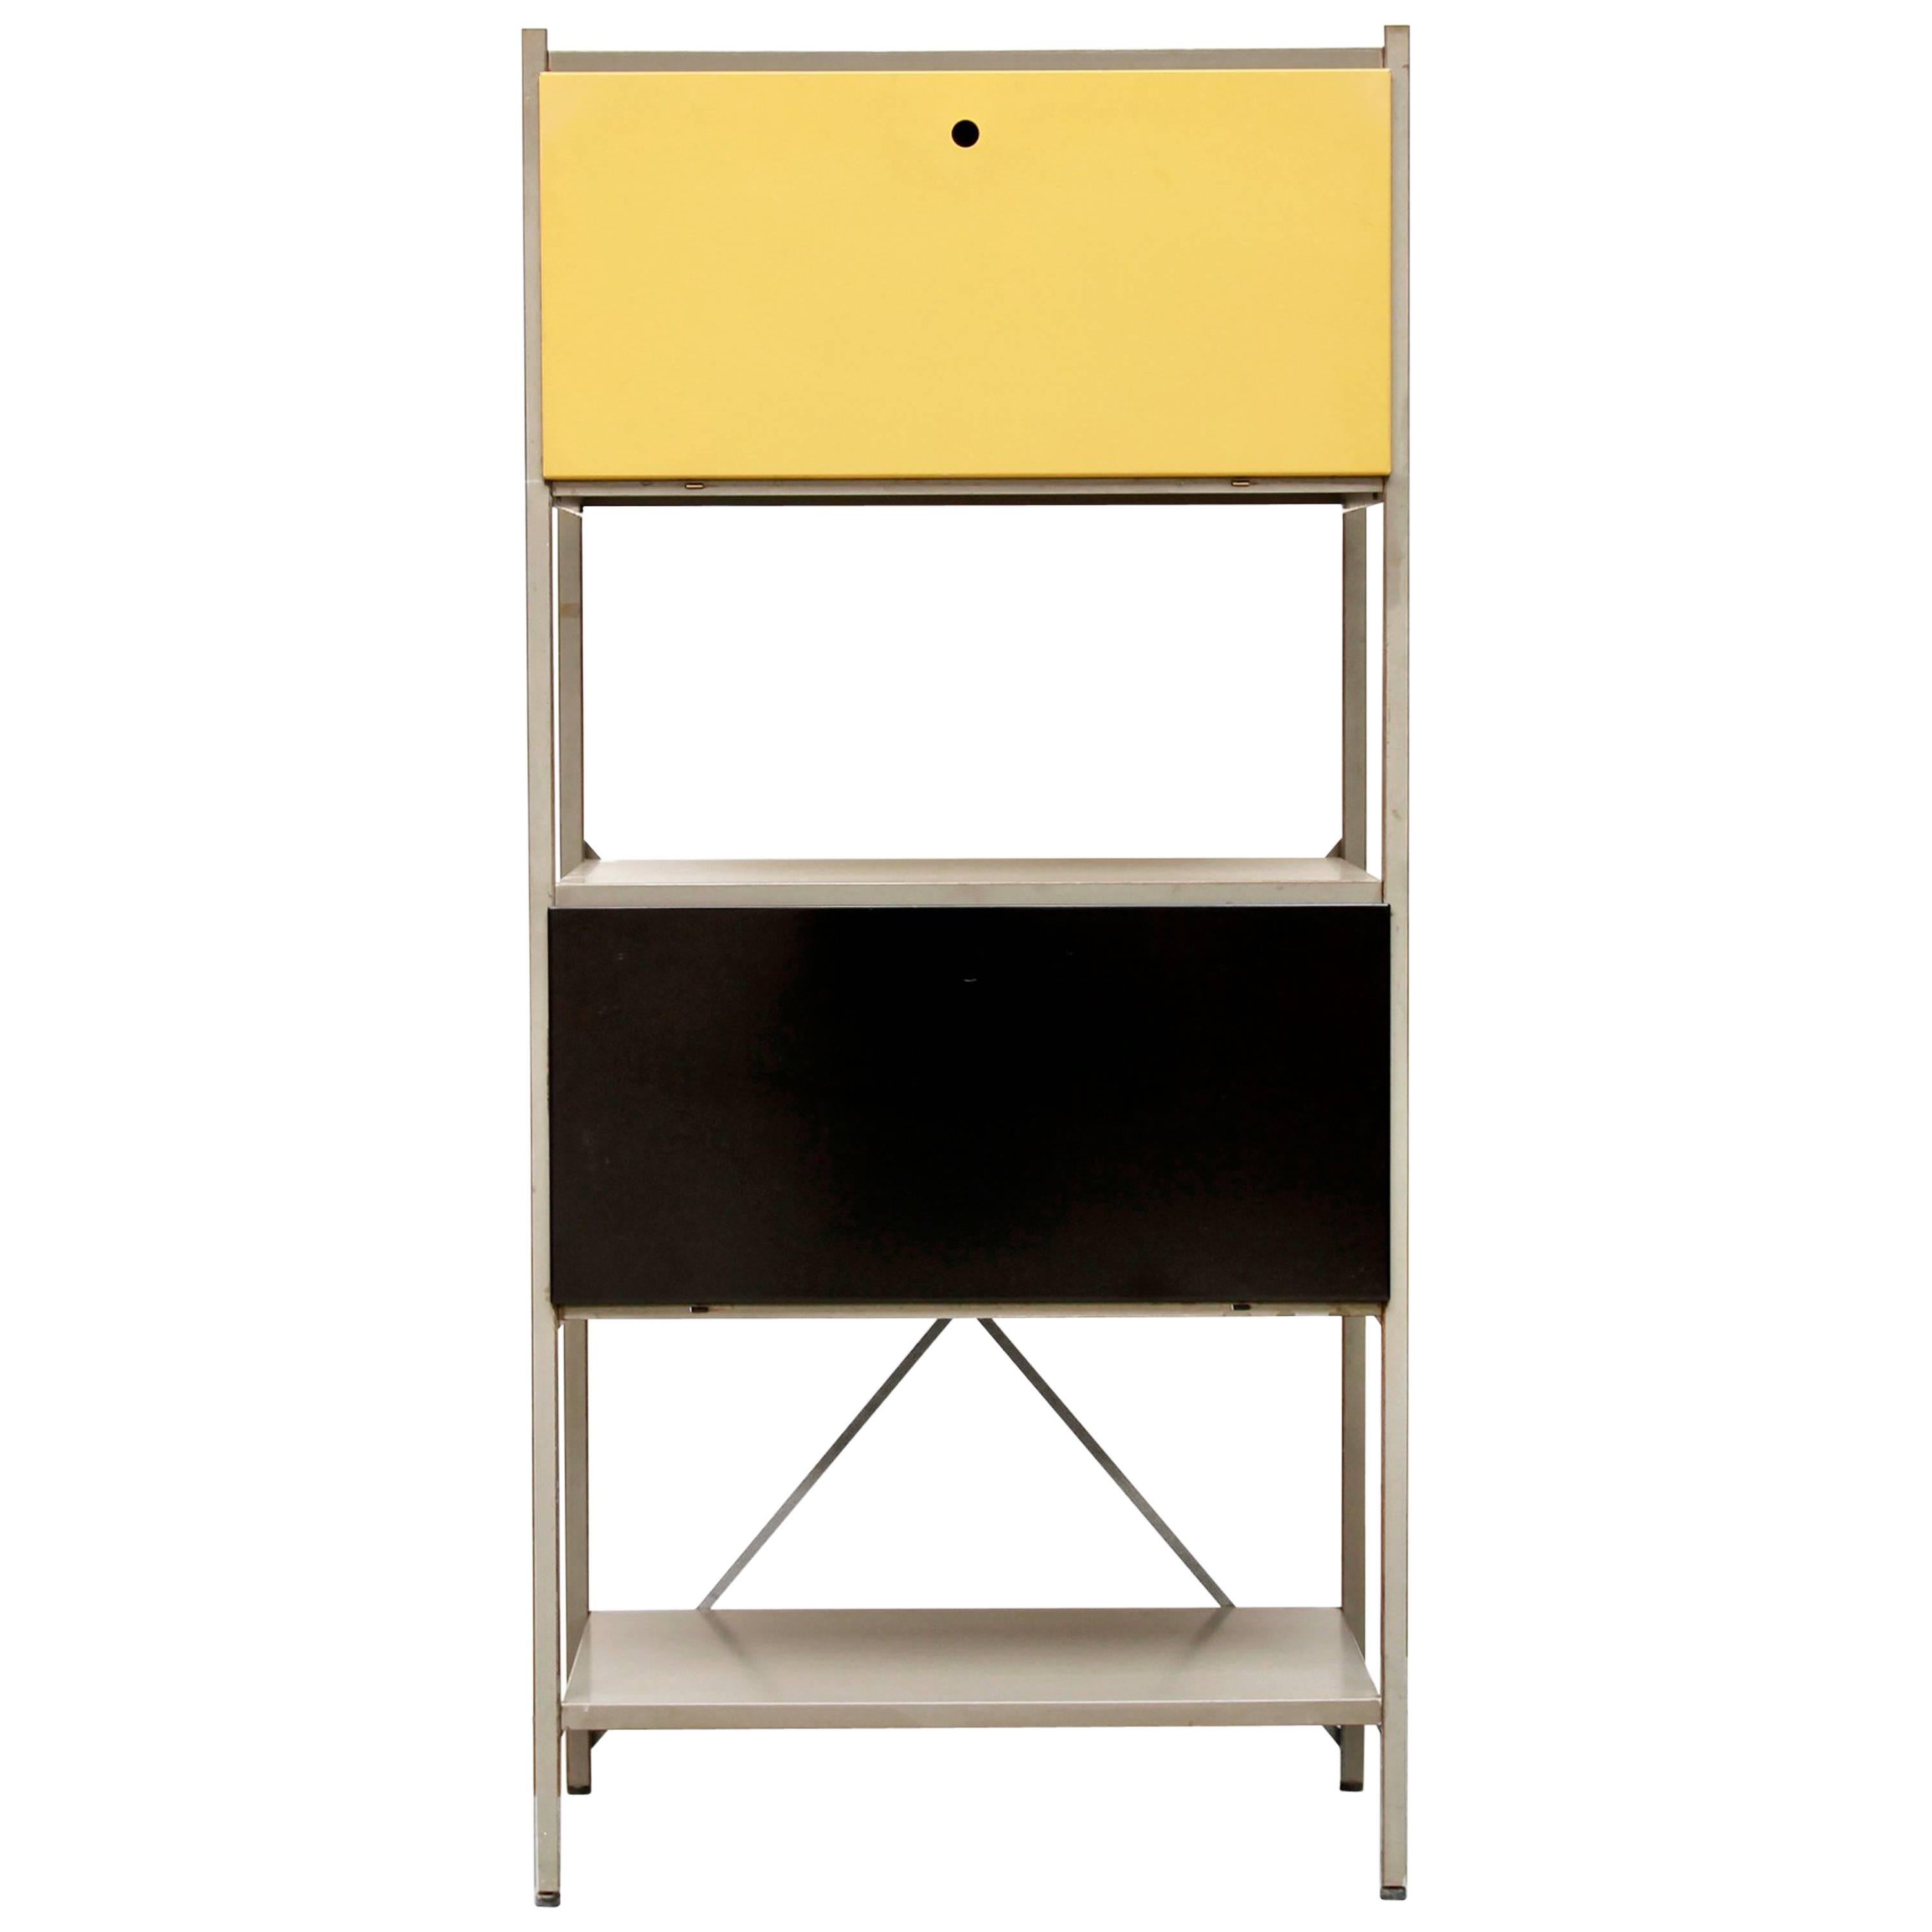 Industrial Metal Cabinet or Divider Model No. 663 by Wim Rietveld for Gispen